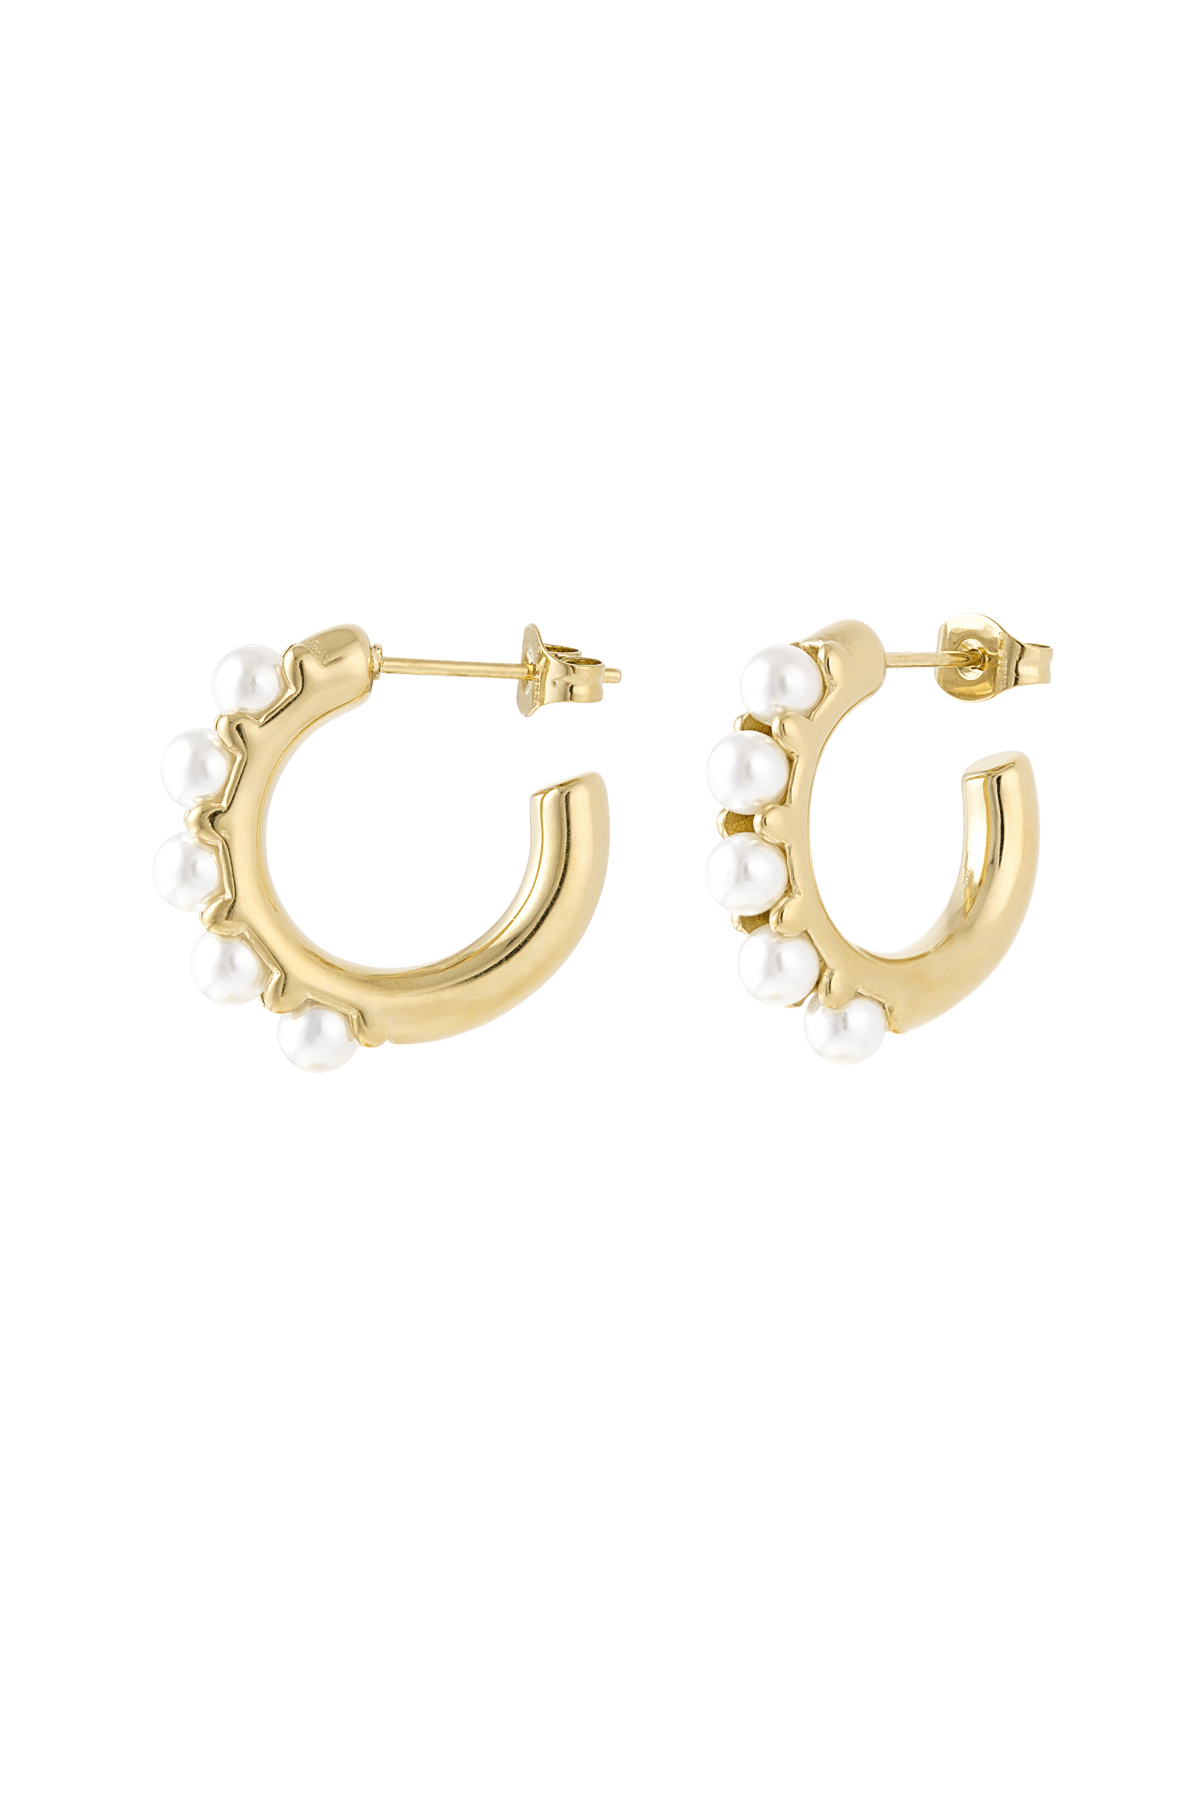 Earrings pearl pureness - gold h5 